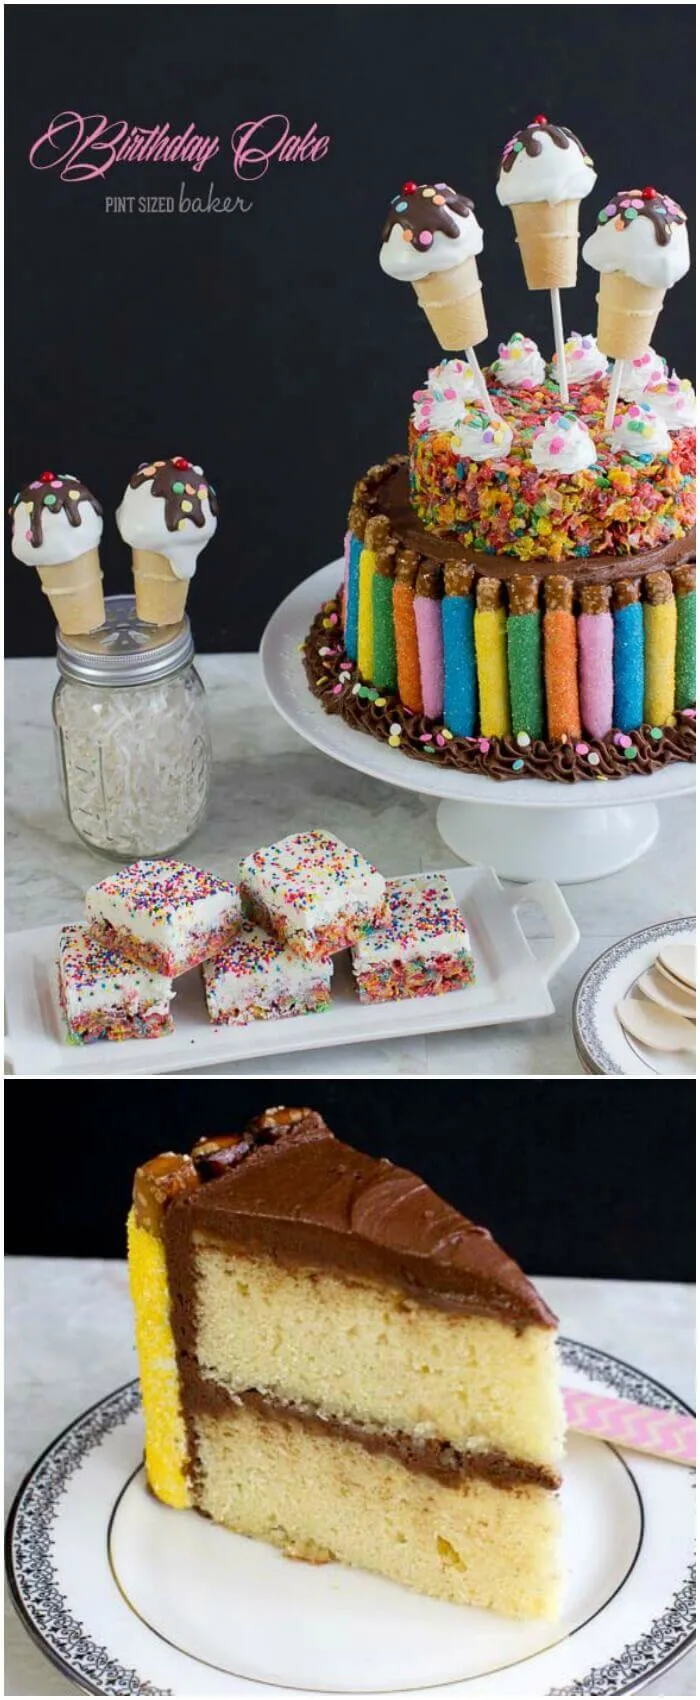 A totally decadent and over the top FUN Birthday Cake! Rich, buttery vanilla cake, chocolate frosting, chocolate dipped pretzels, Fruity Pebbles Treat top and ice cream cone cake pops! So FUN!